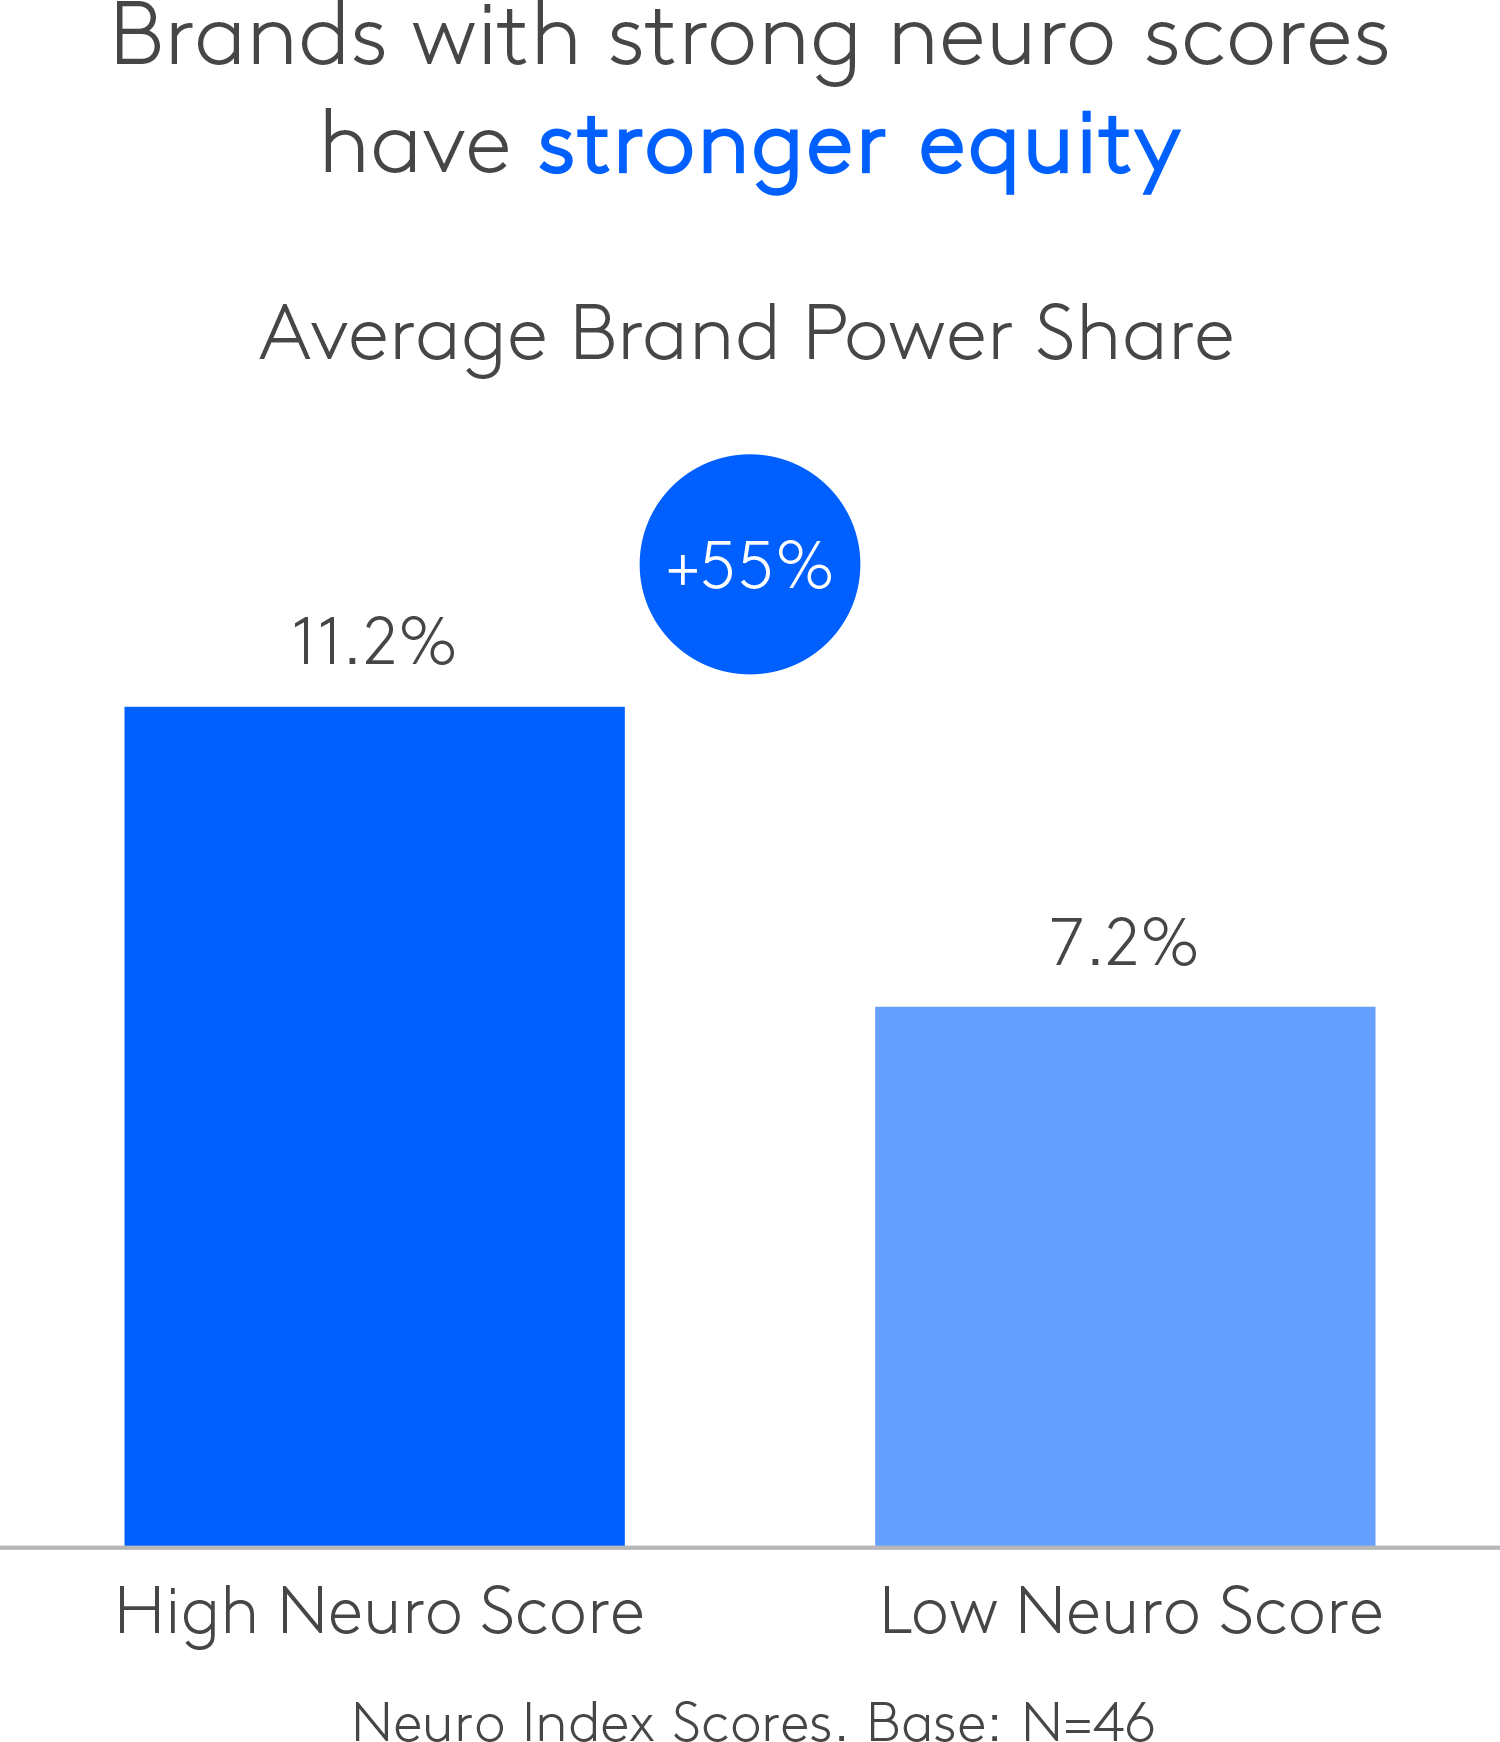 Brands with strong neuro scores have stronger equity